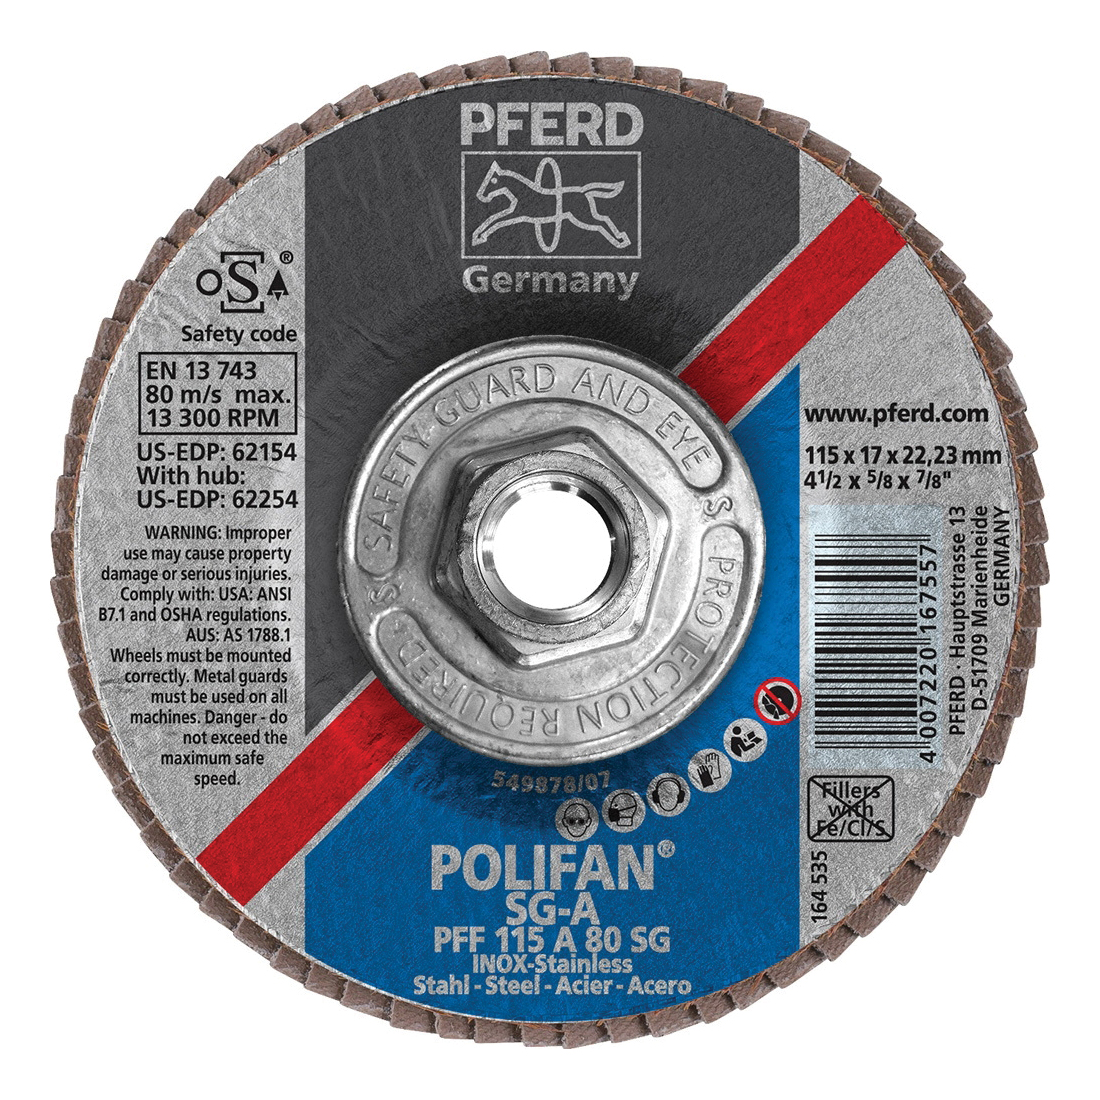 PFERD Polifan® 62254 Performance Line SG A Threaded Coated Abrasive Flap Disc, 4-1/2 in Dia, 80 Grit, Aluminum Oxide Abrasive, Type 27 Flat Disc